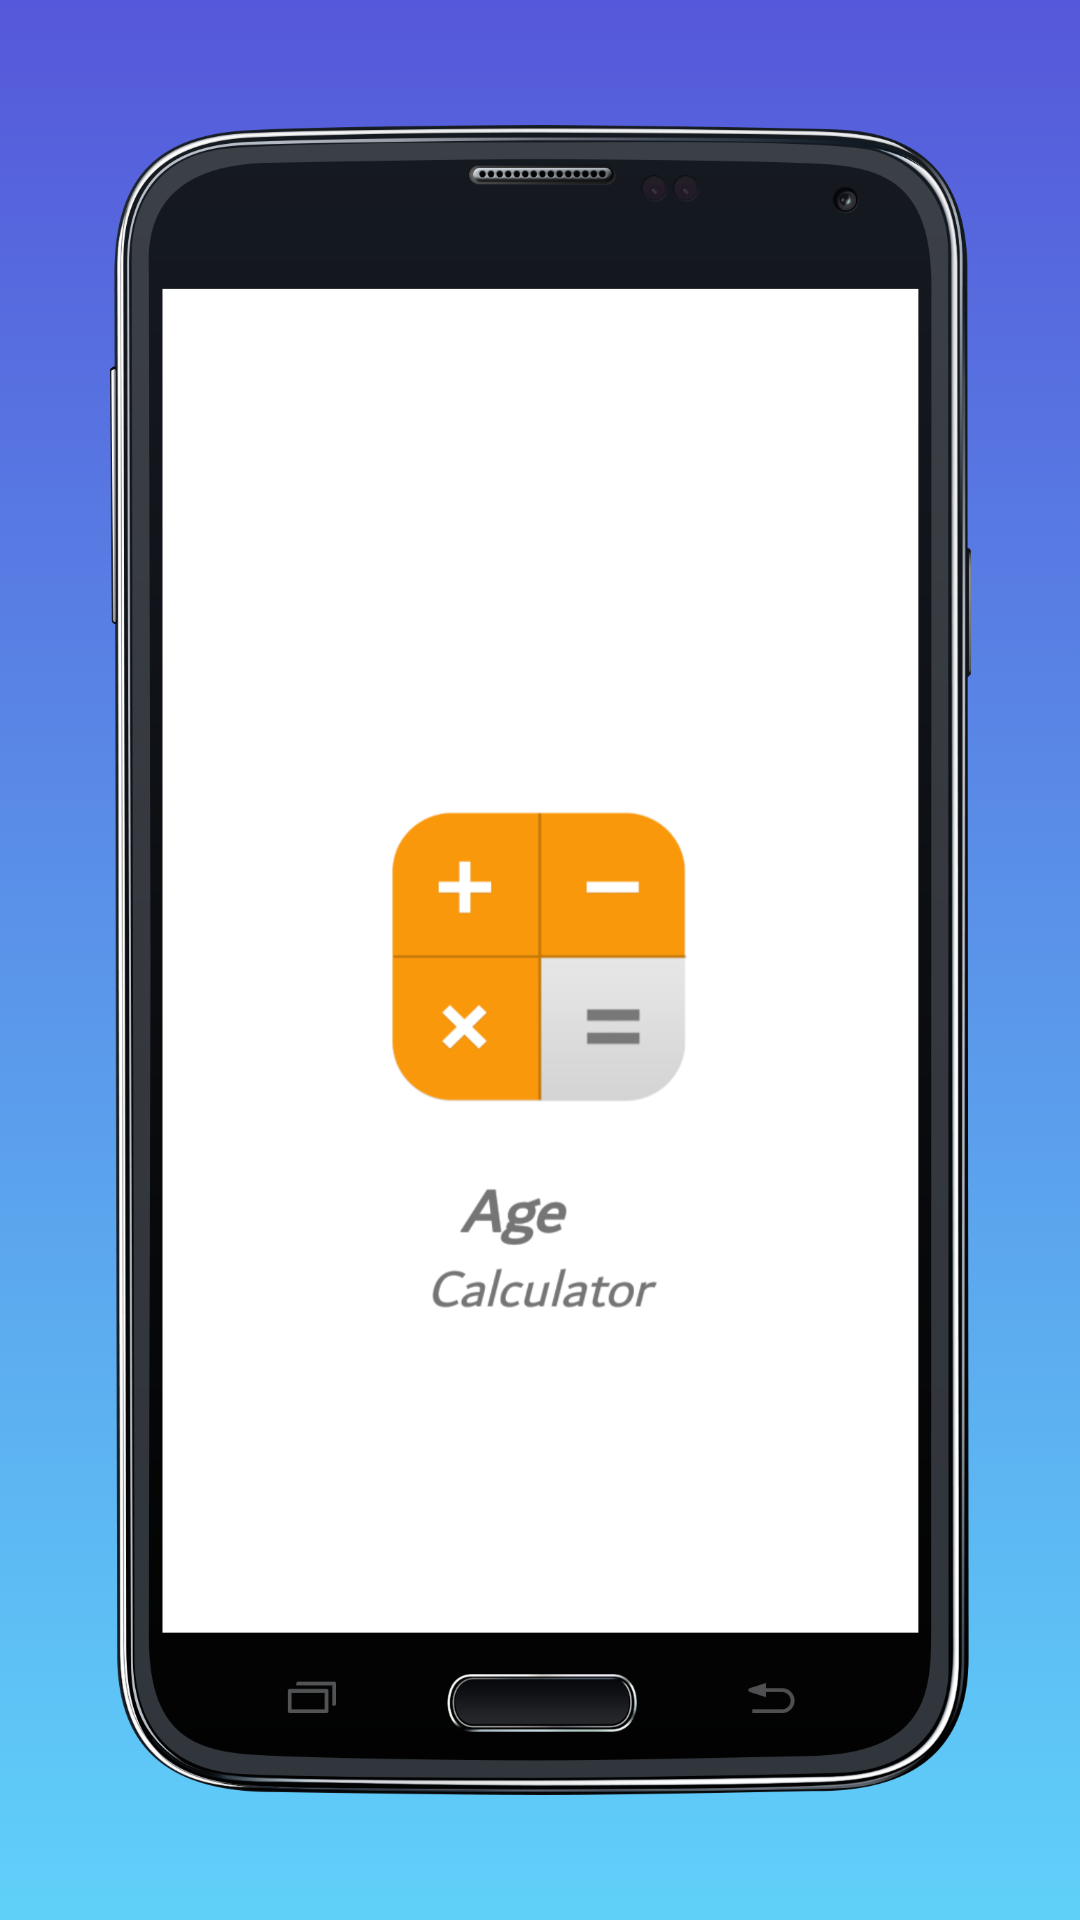 Age Calculating Tool